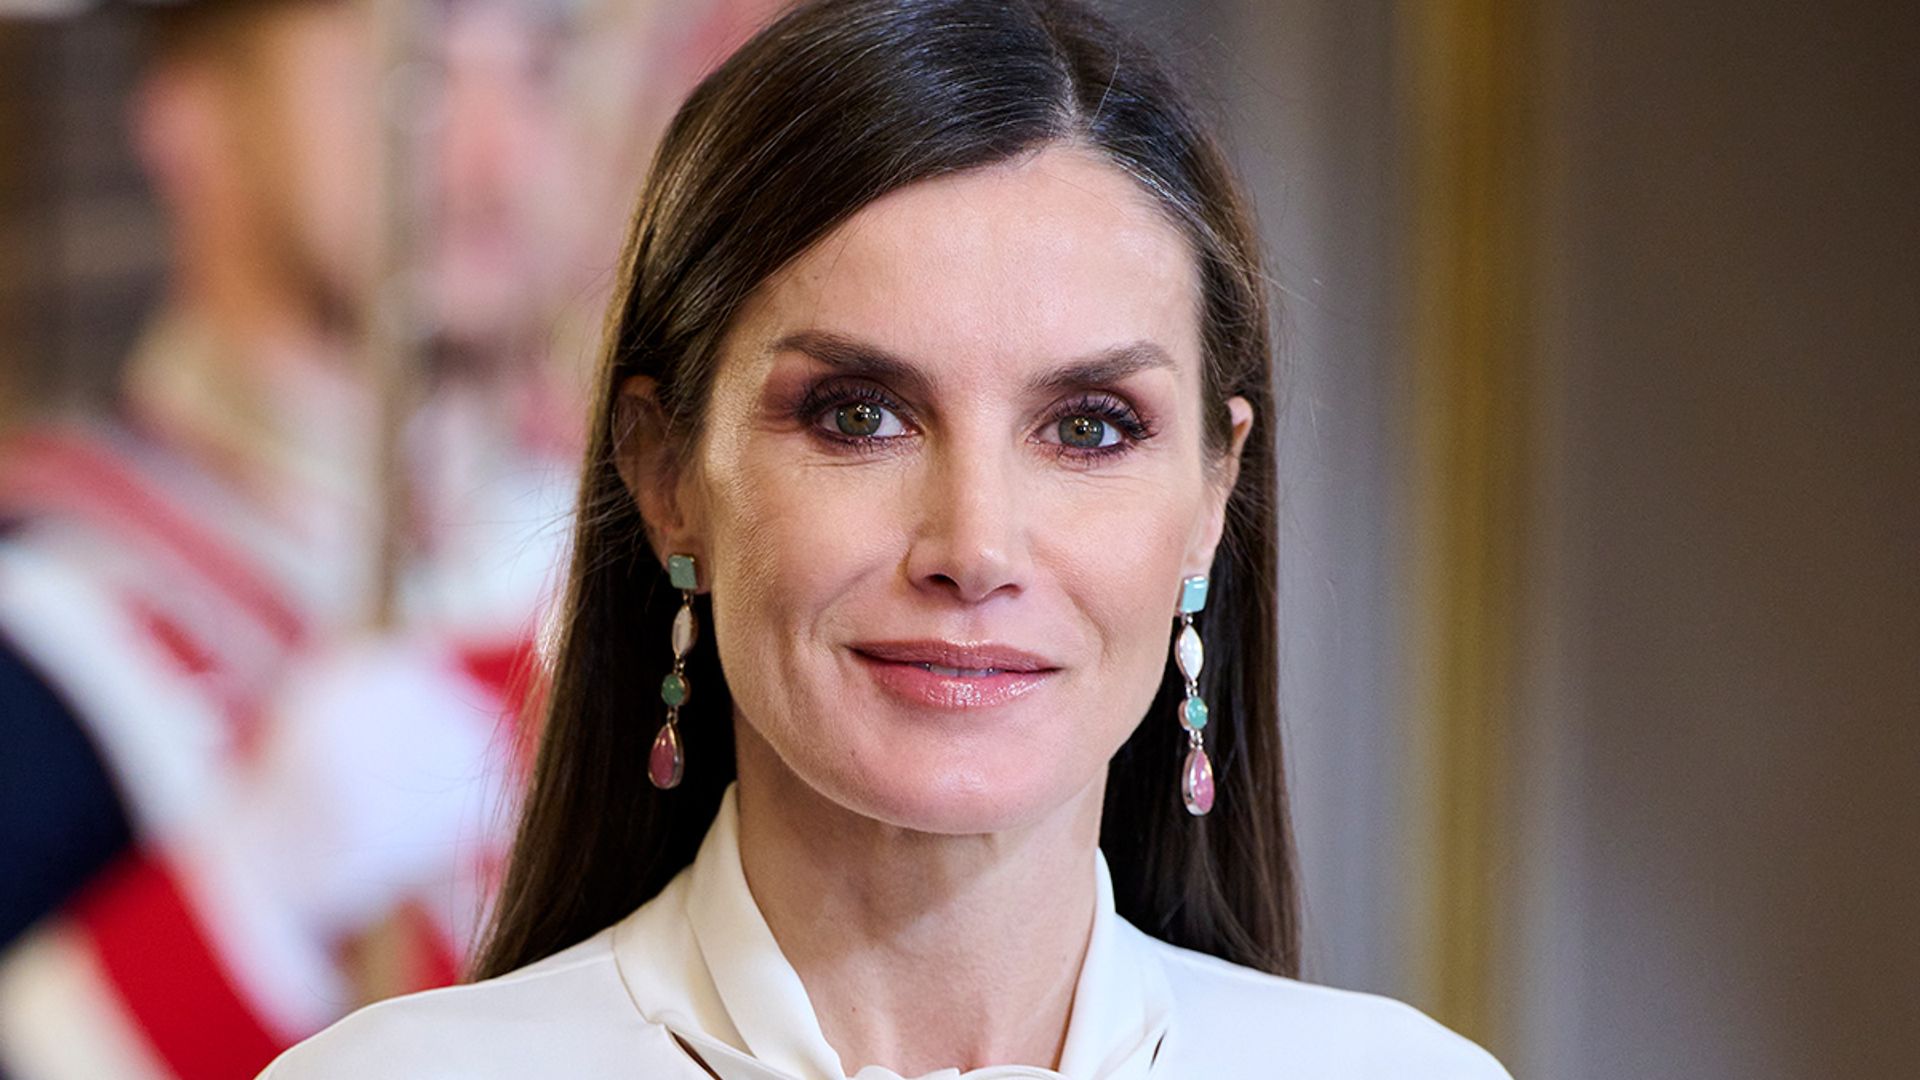 Watch Queen Letizia's reaction as royal guest fails to shake her hand ...